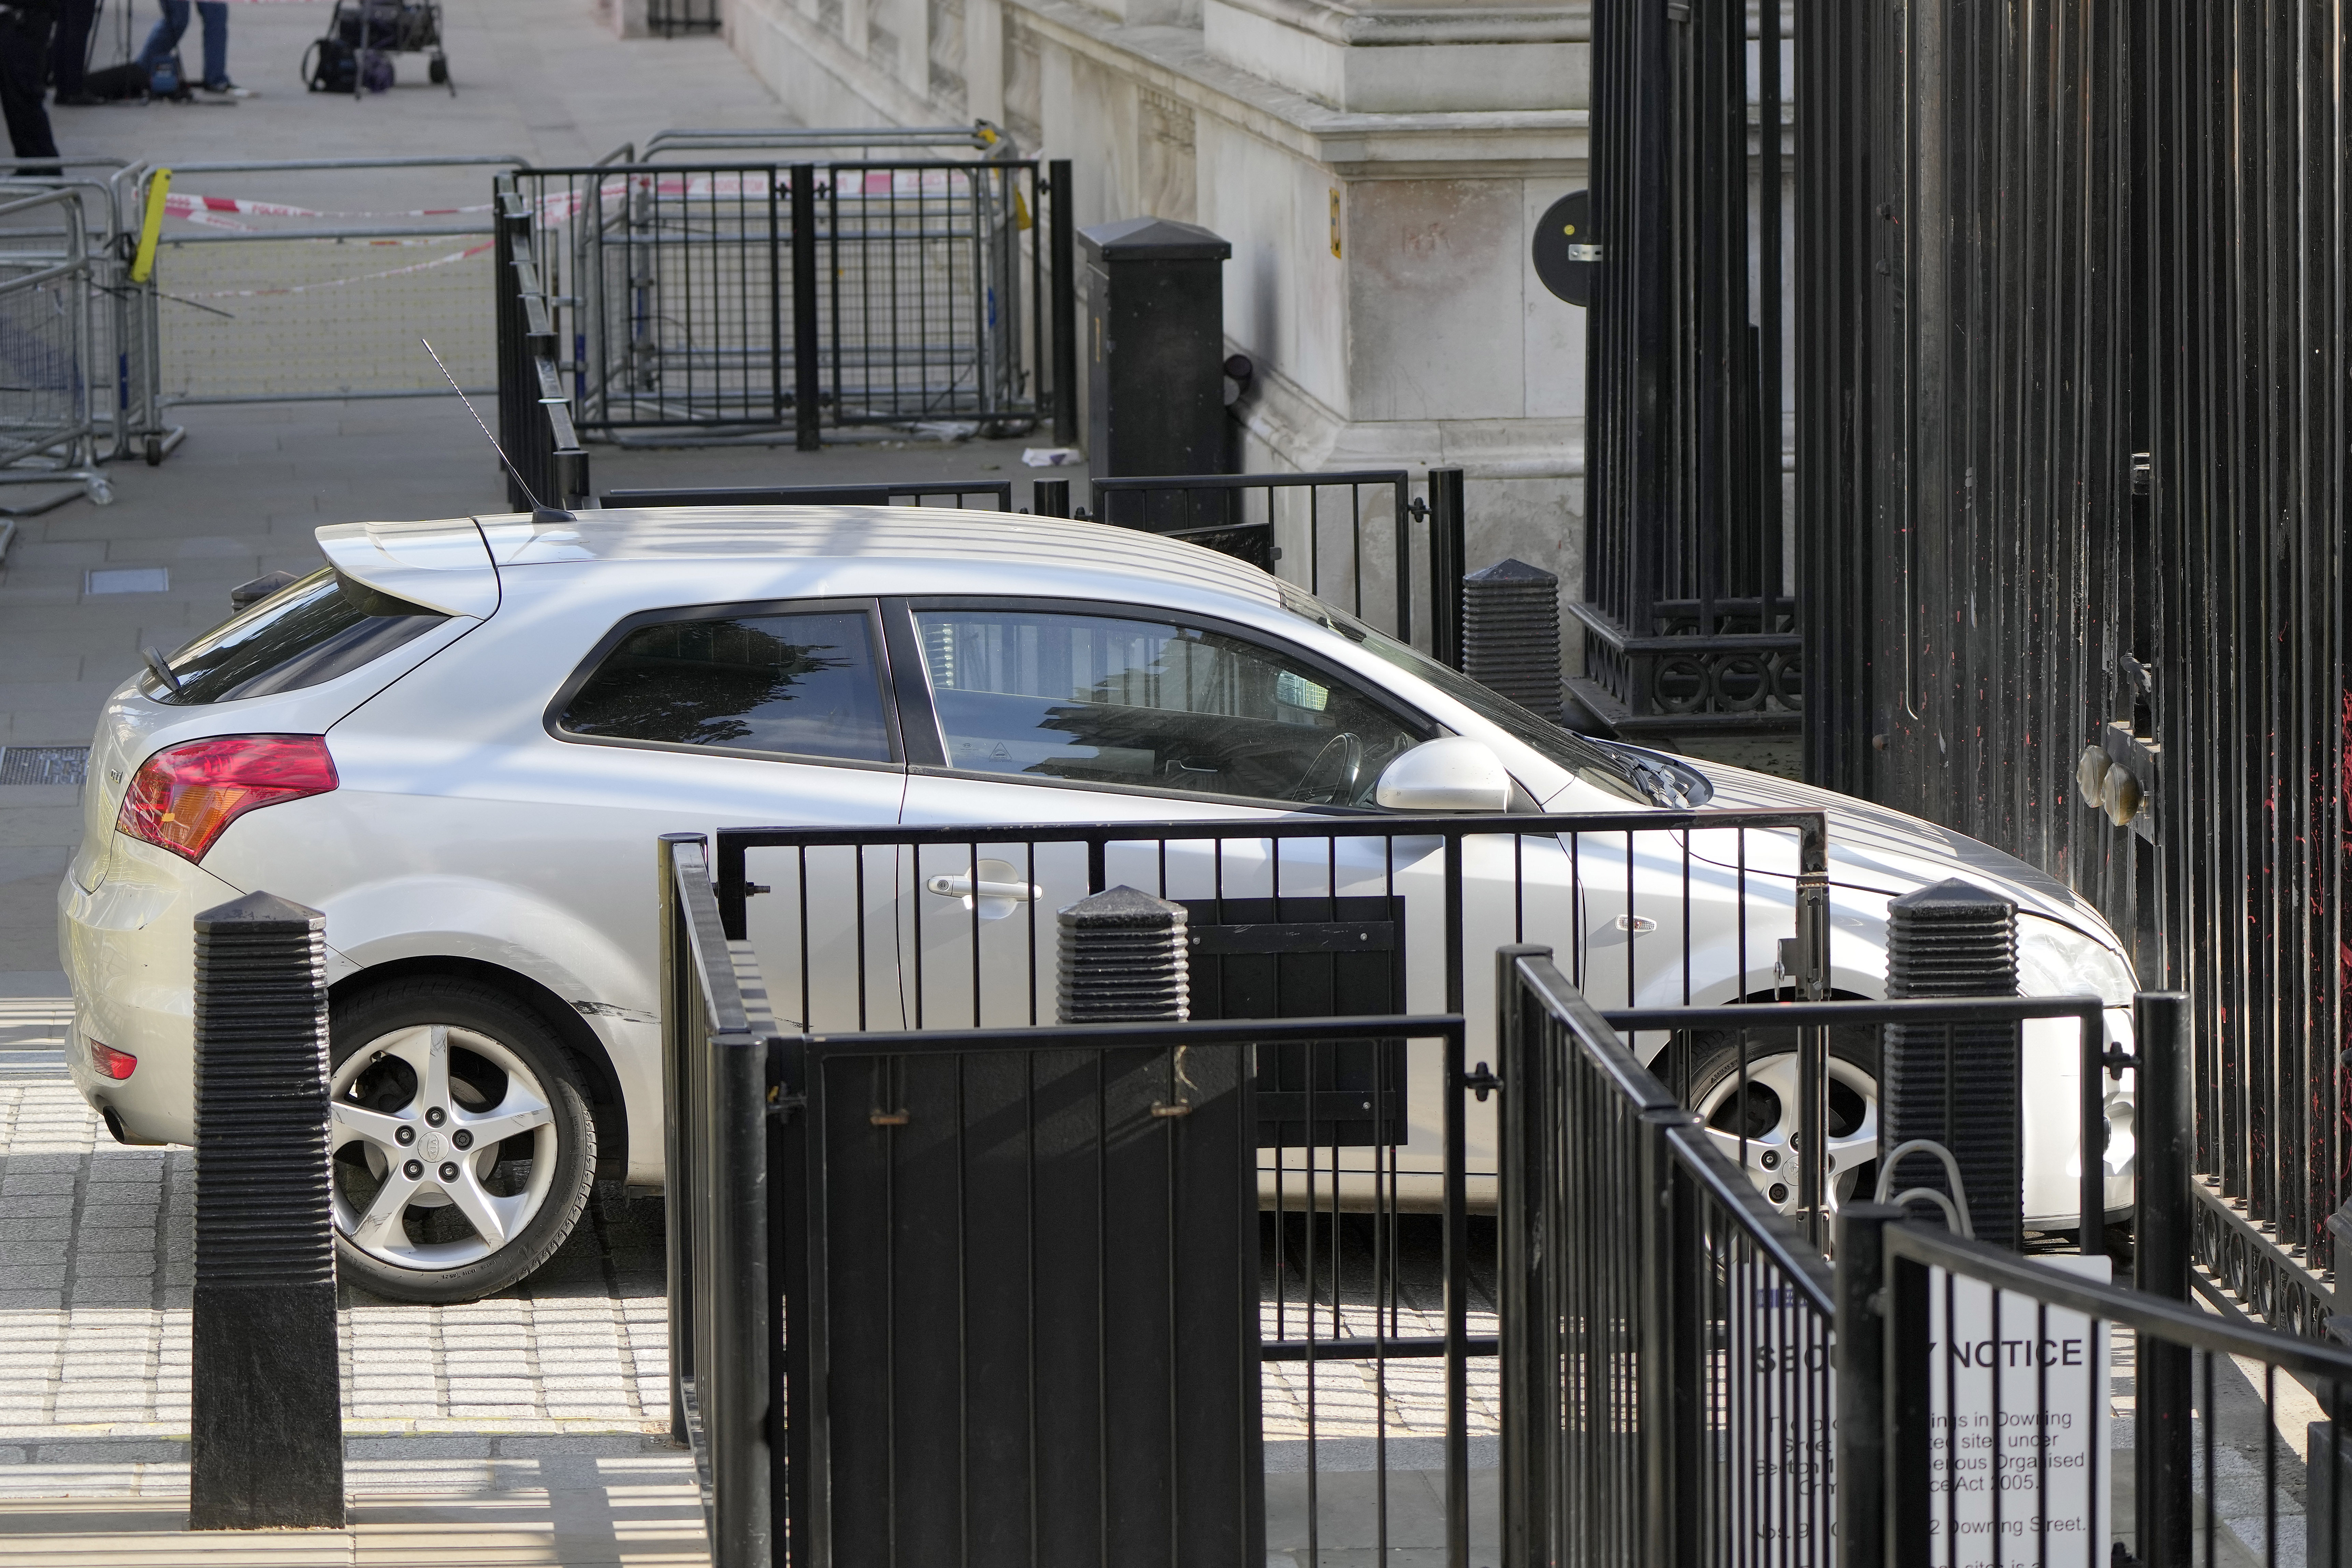 Man who crashed into Downing St. gates in London released — then rearrested on another charge